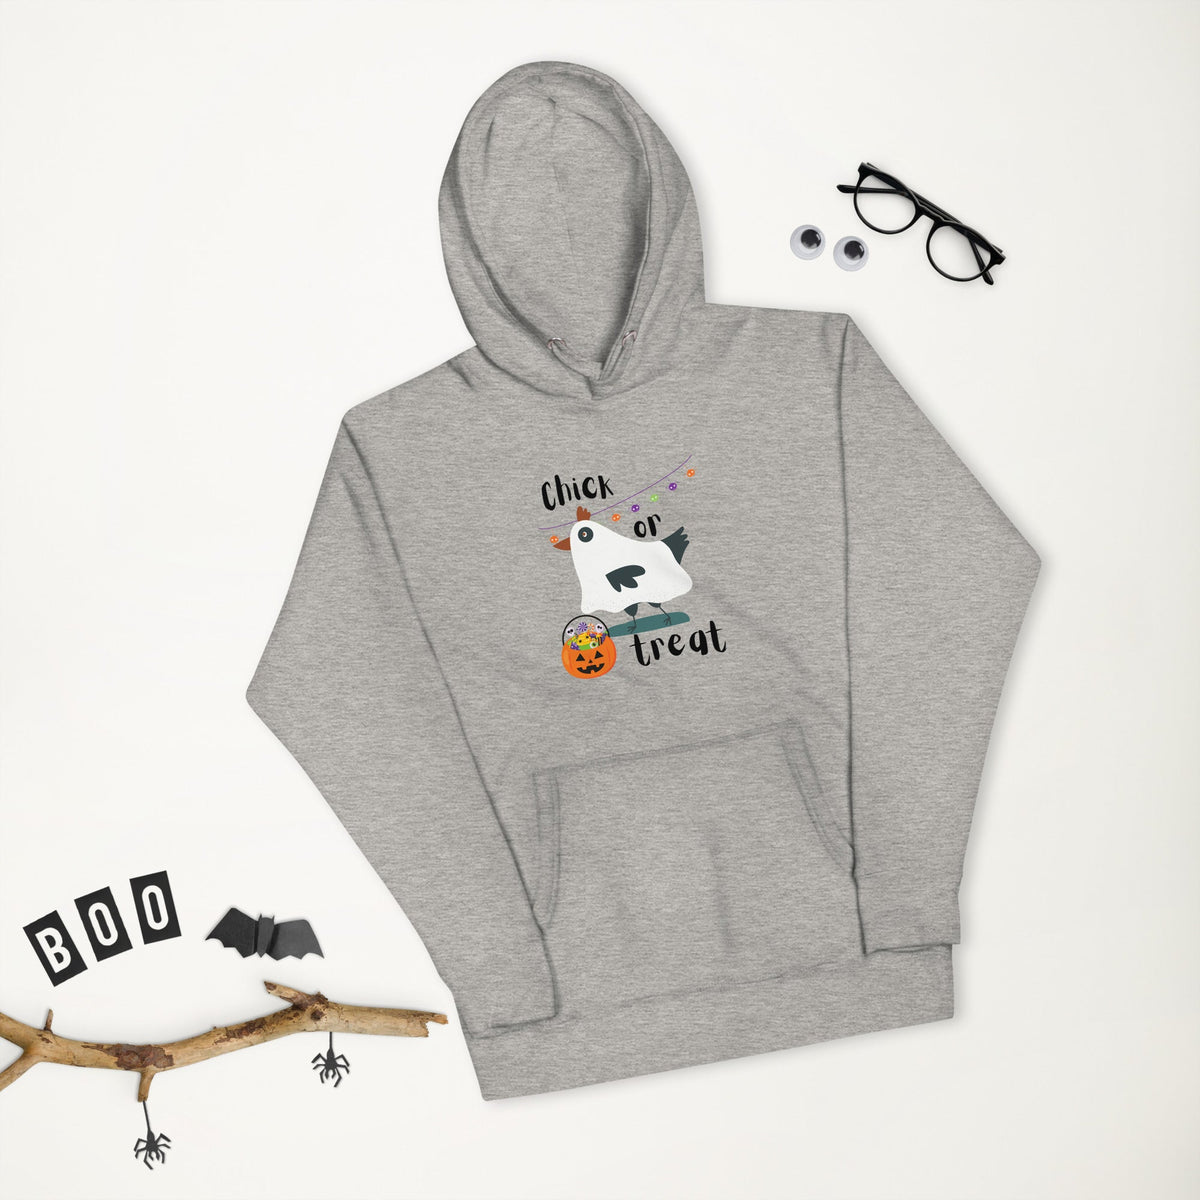 Chick or Treat Adult Unisex Hoodie - Cluck It All Farms